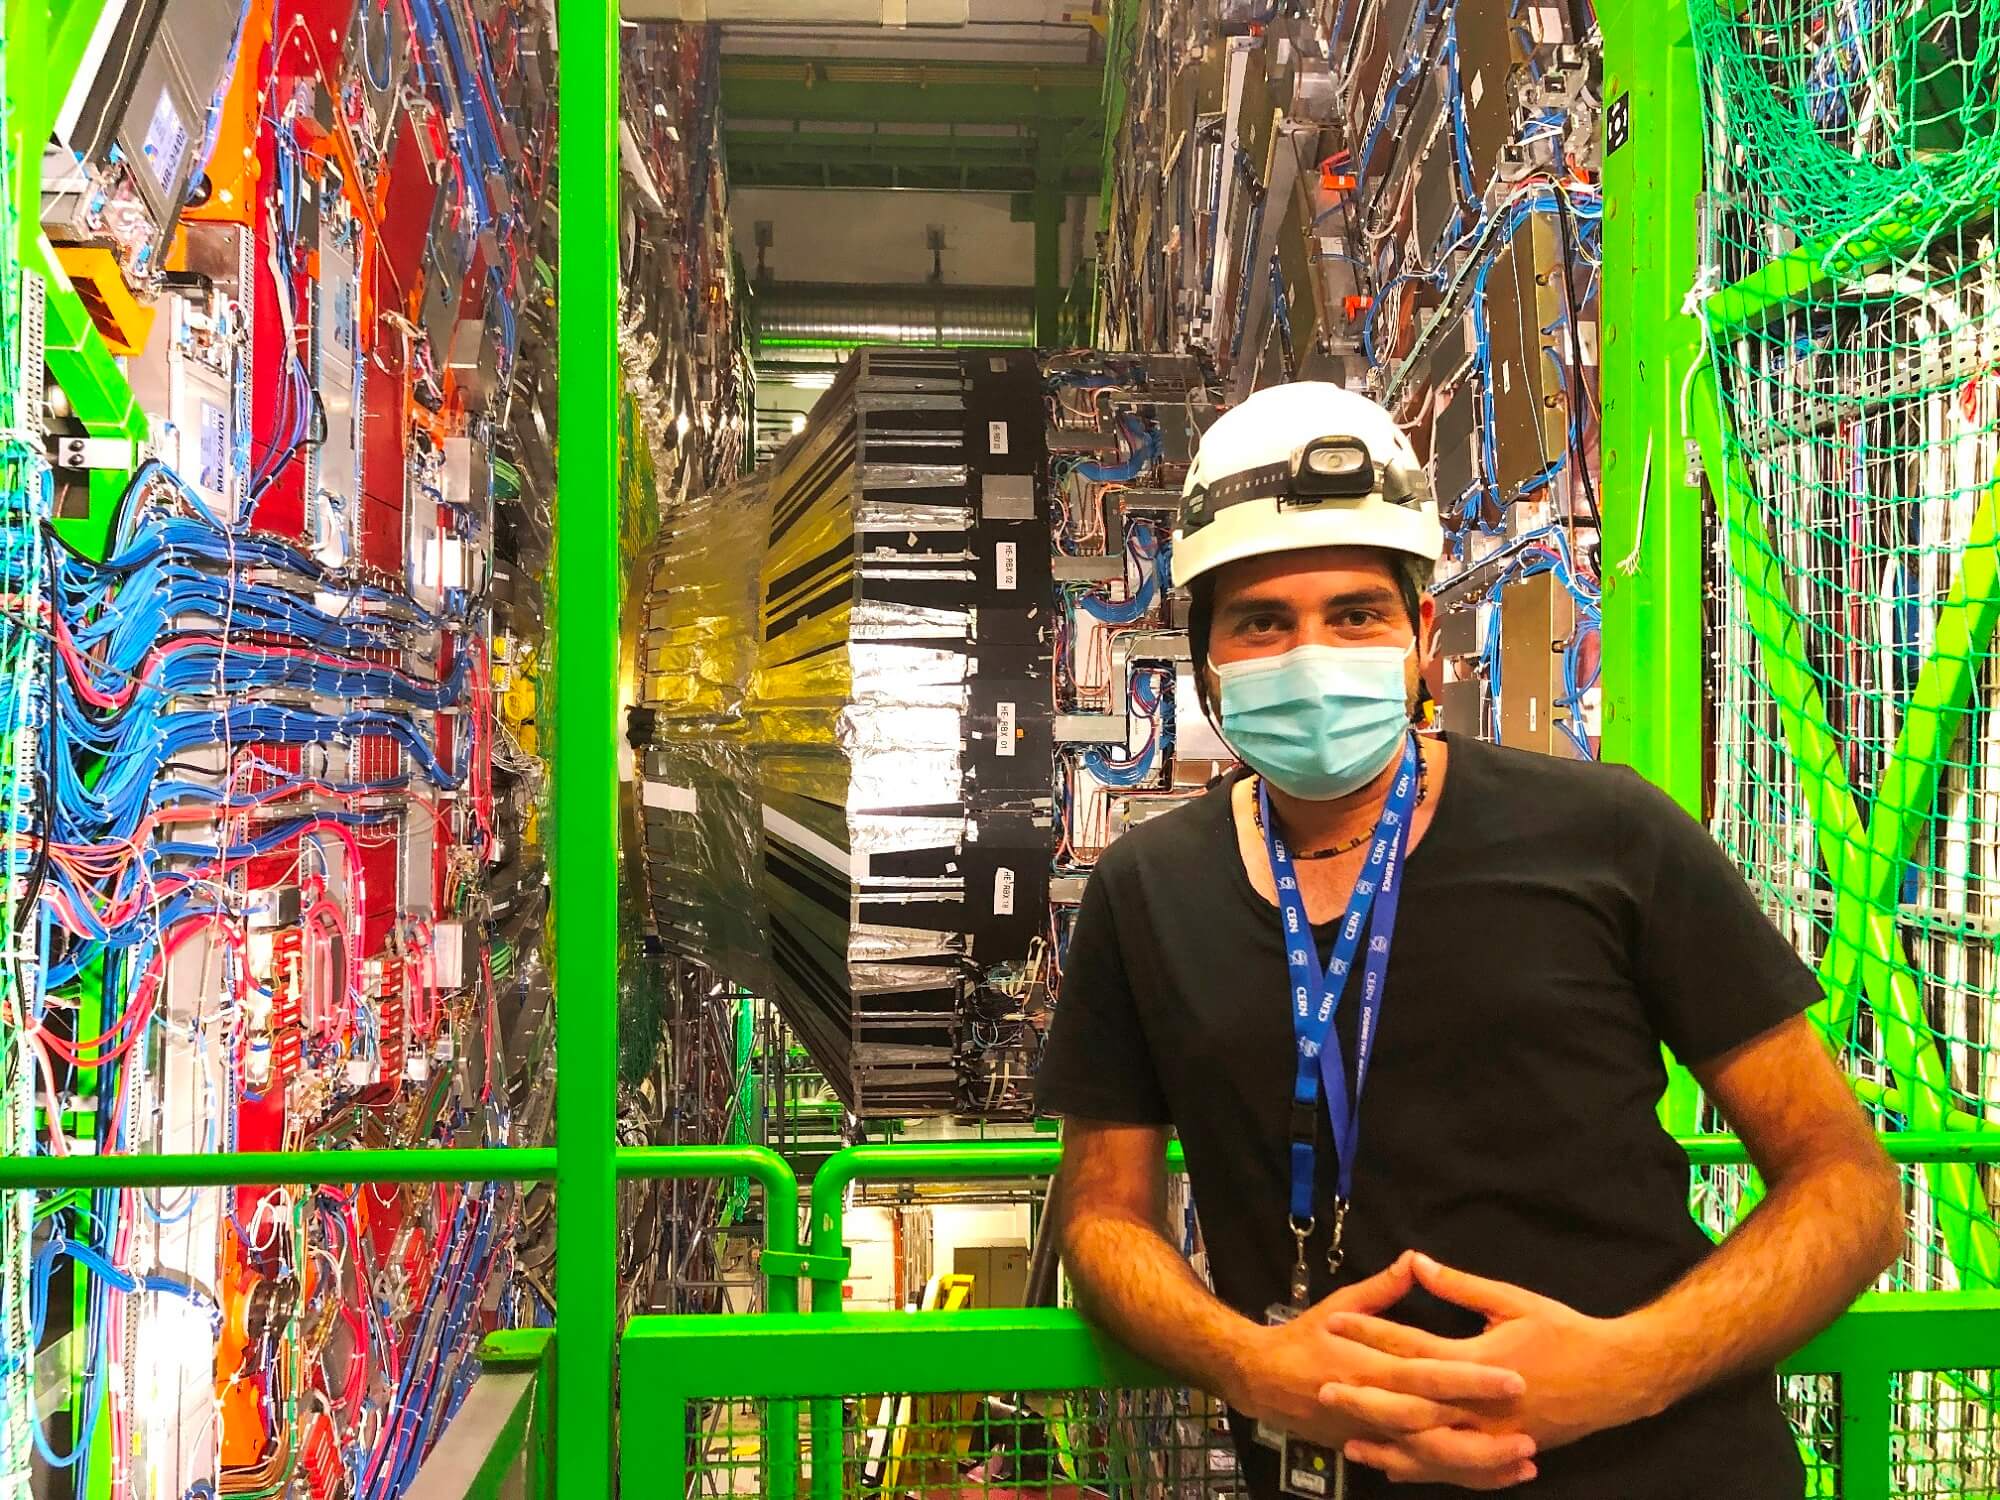 Assoc. Prof. Dr. İlker Özşahin successfully represents our country in the Compact Muon Solenoid (CMS) team, which is one of the six experiments conducted at CERN.